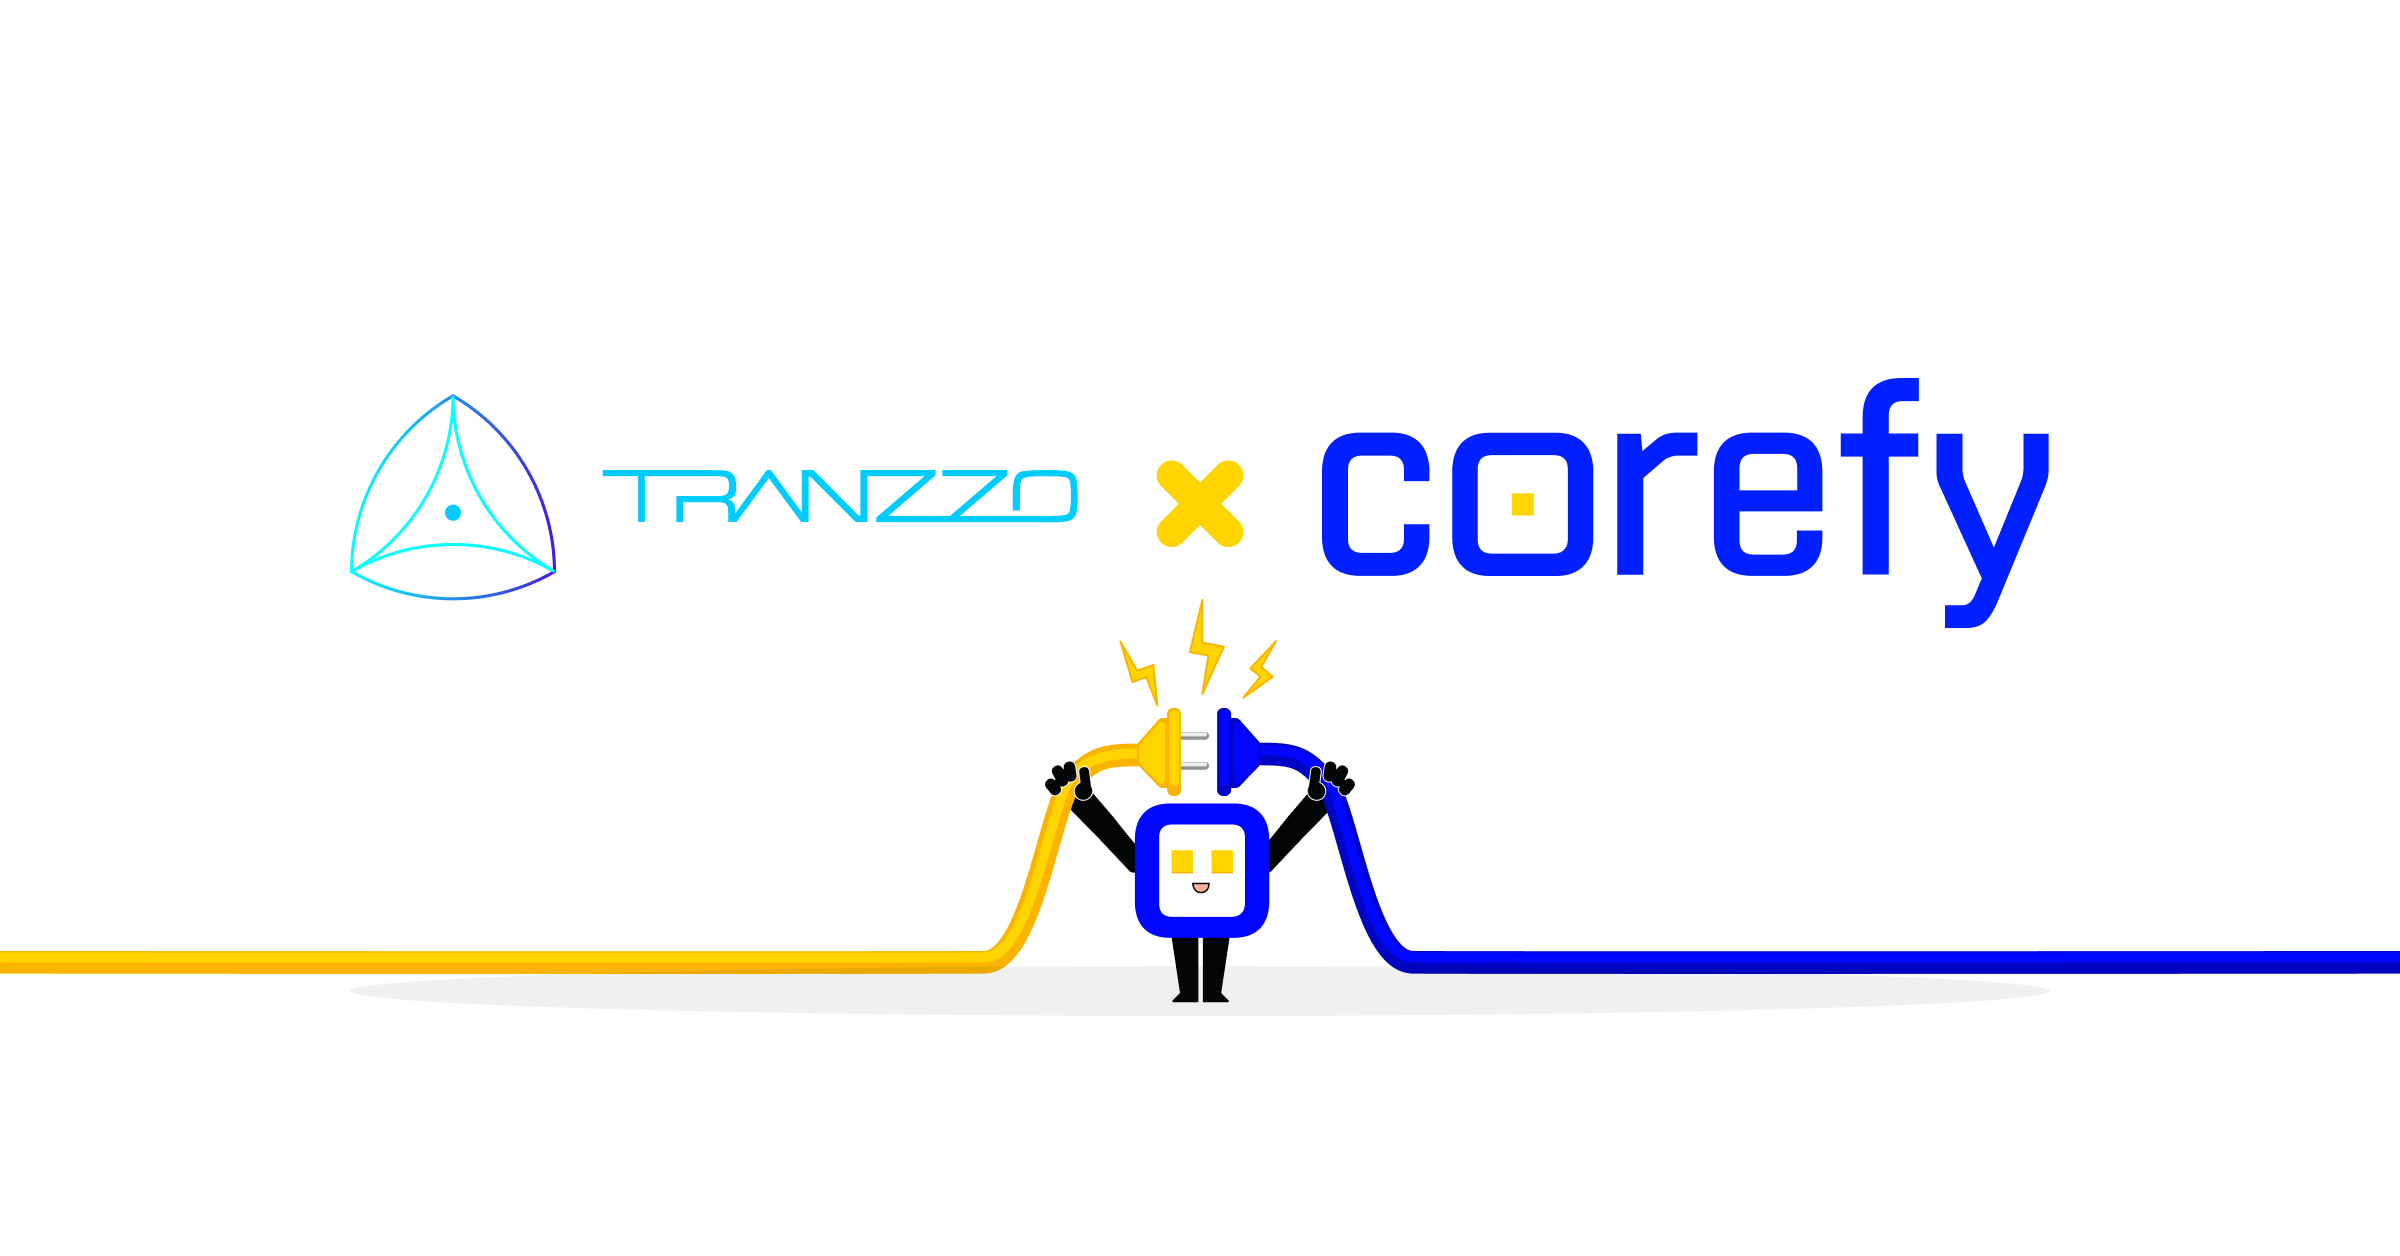 New integration with Tranzzo